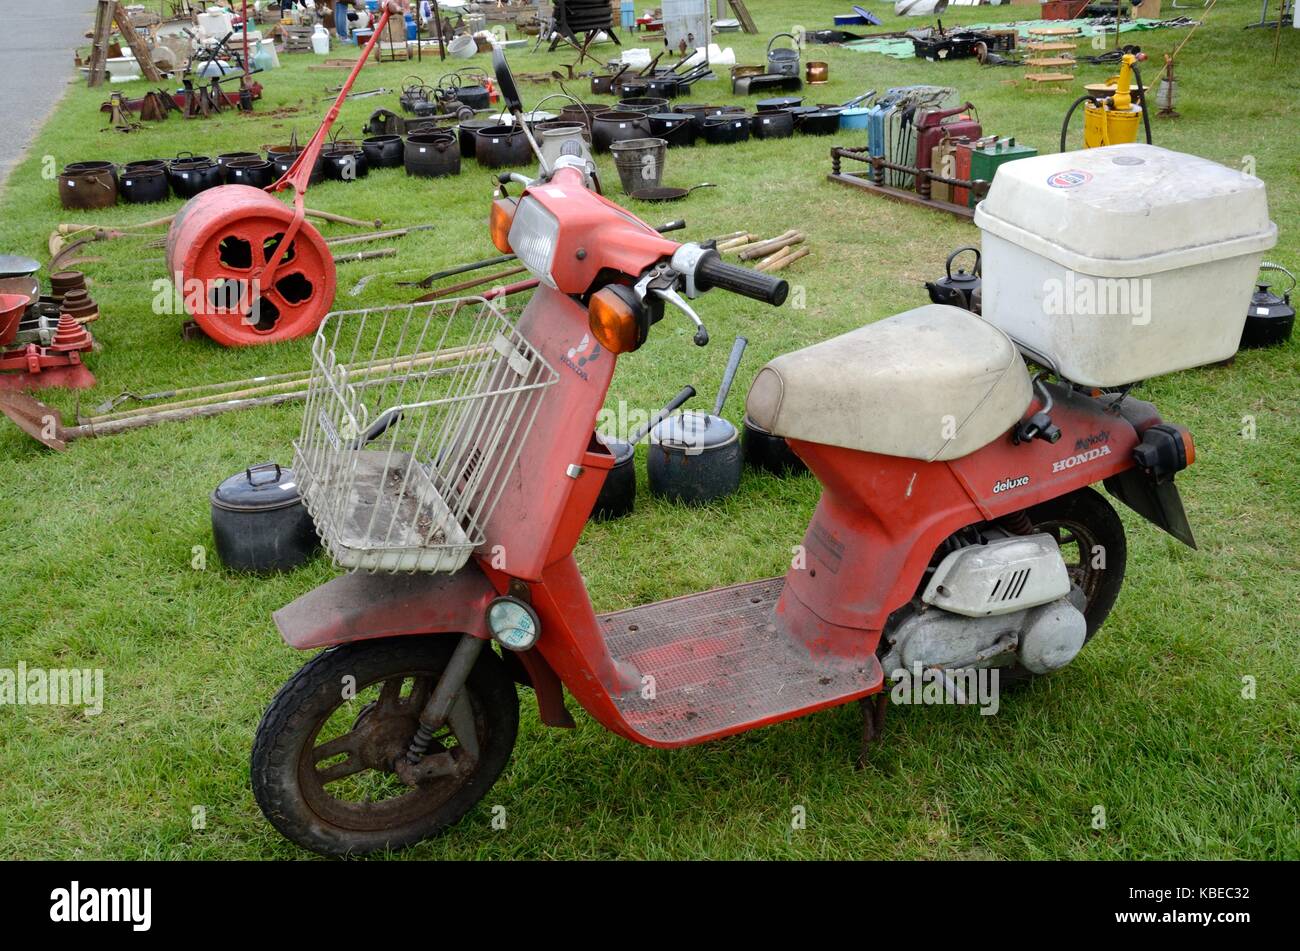 Vintage Honda scooter for sale in a flea market Stock Photo - Alamy